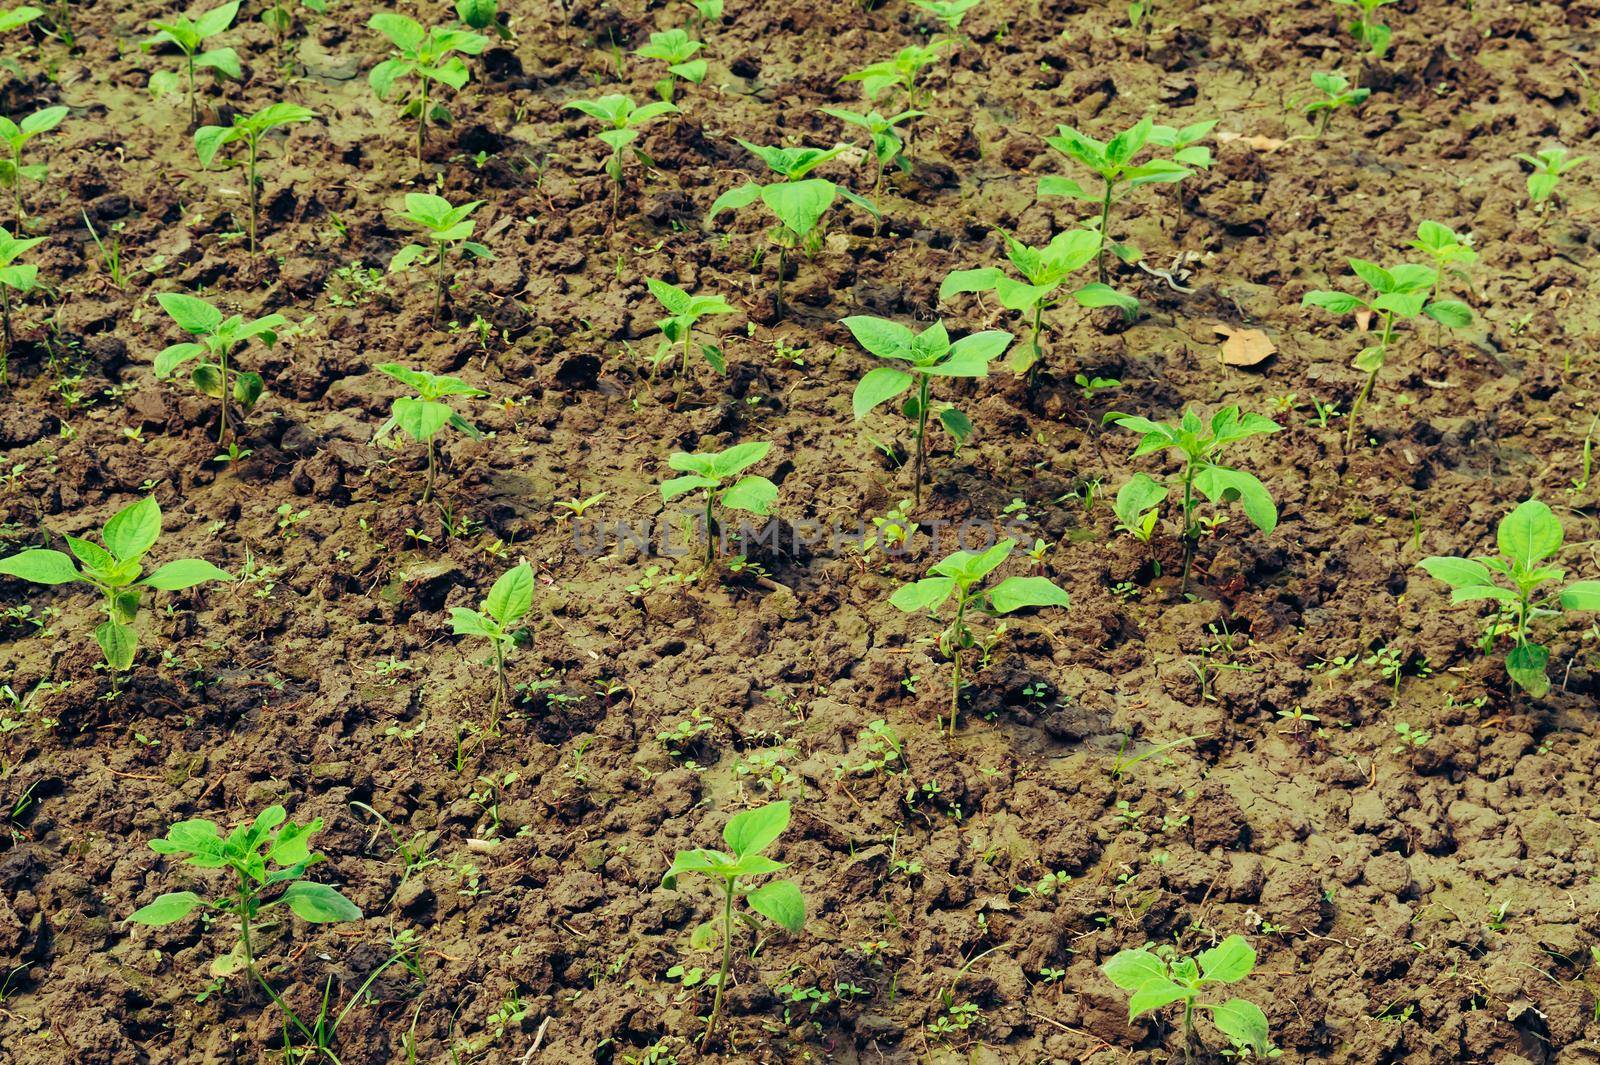 Sprouting green plants growing on agriculture field. Full frame. Nature background.